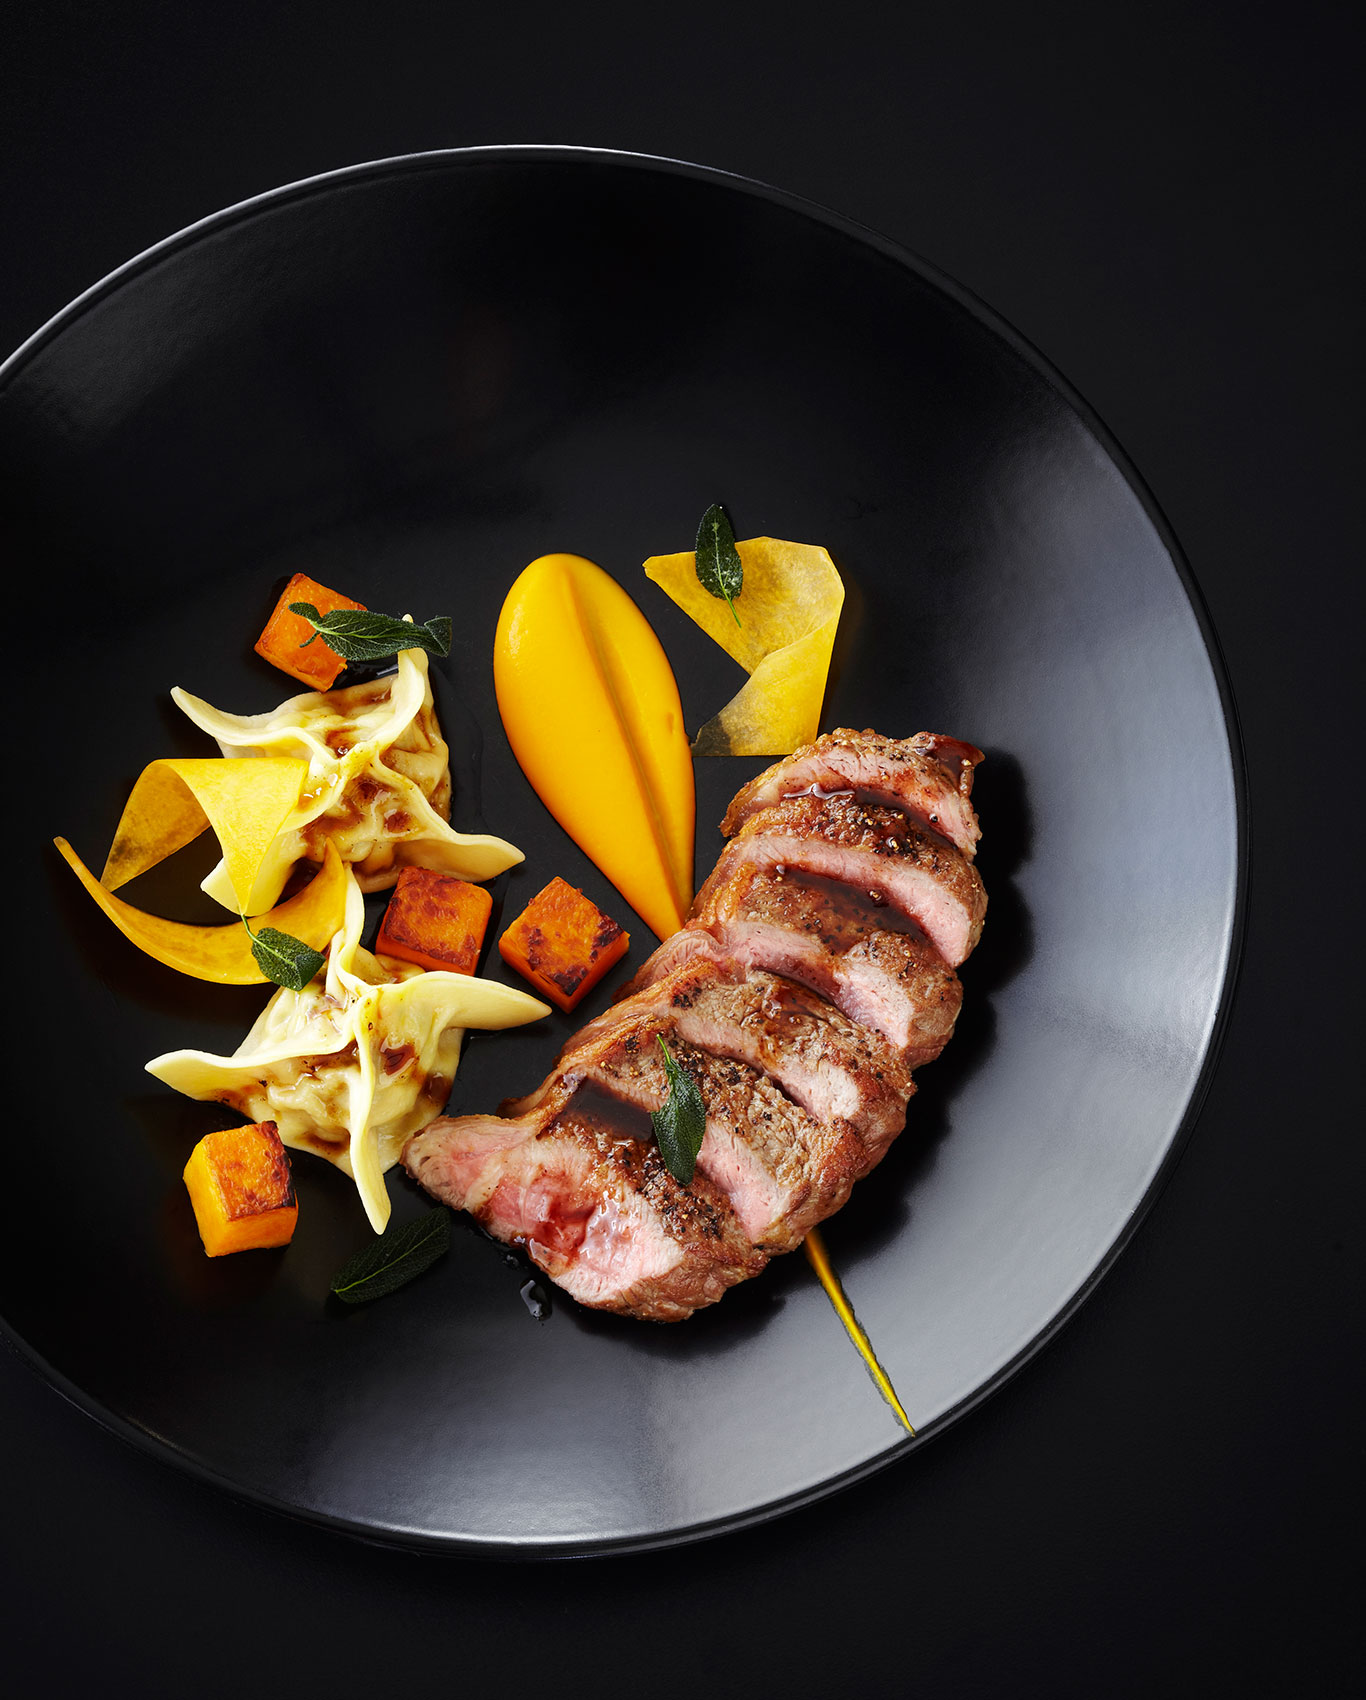 Southon Cooking • The Foodstore Roast Veal with Pumpkin & Sage on Dark Plate • Hospitality & Editorial Food Photography